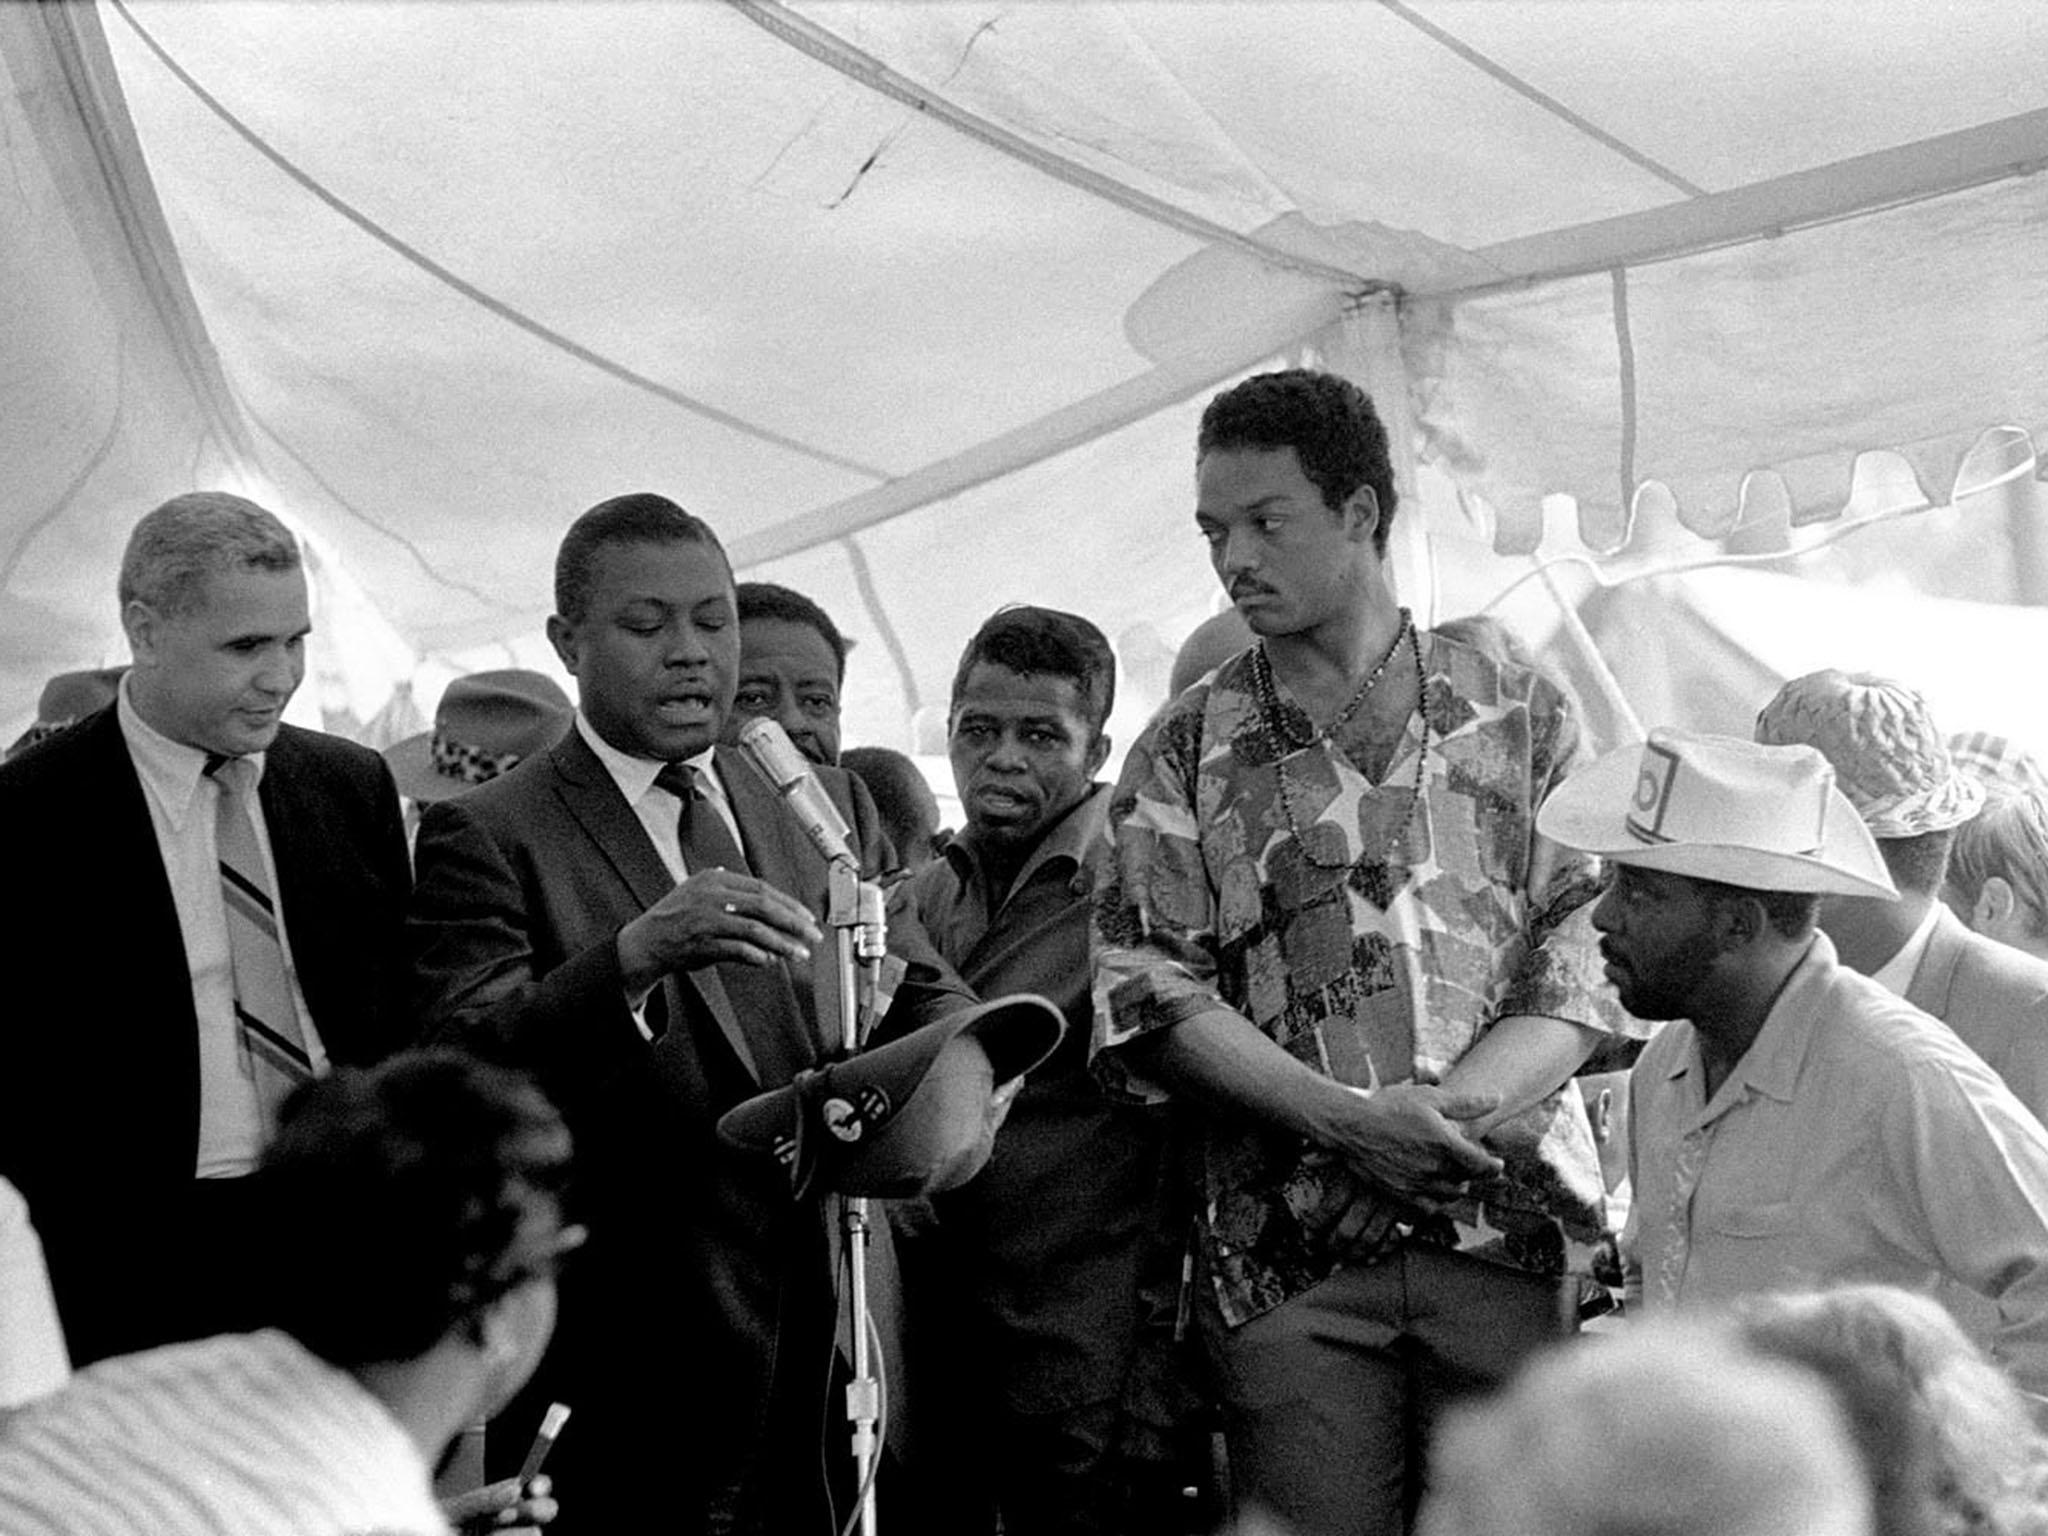 The Rev Jesse Jackson and singer James Brown were among the many famous visitors to the tent city